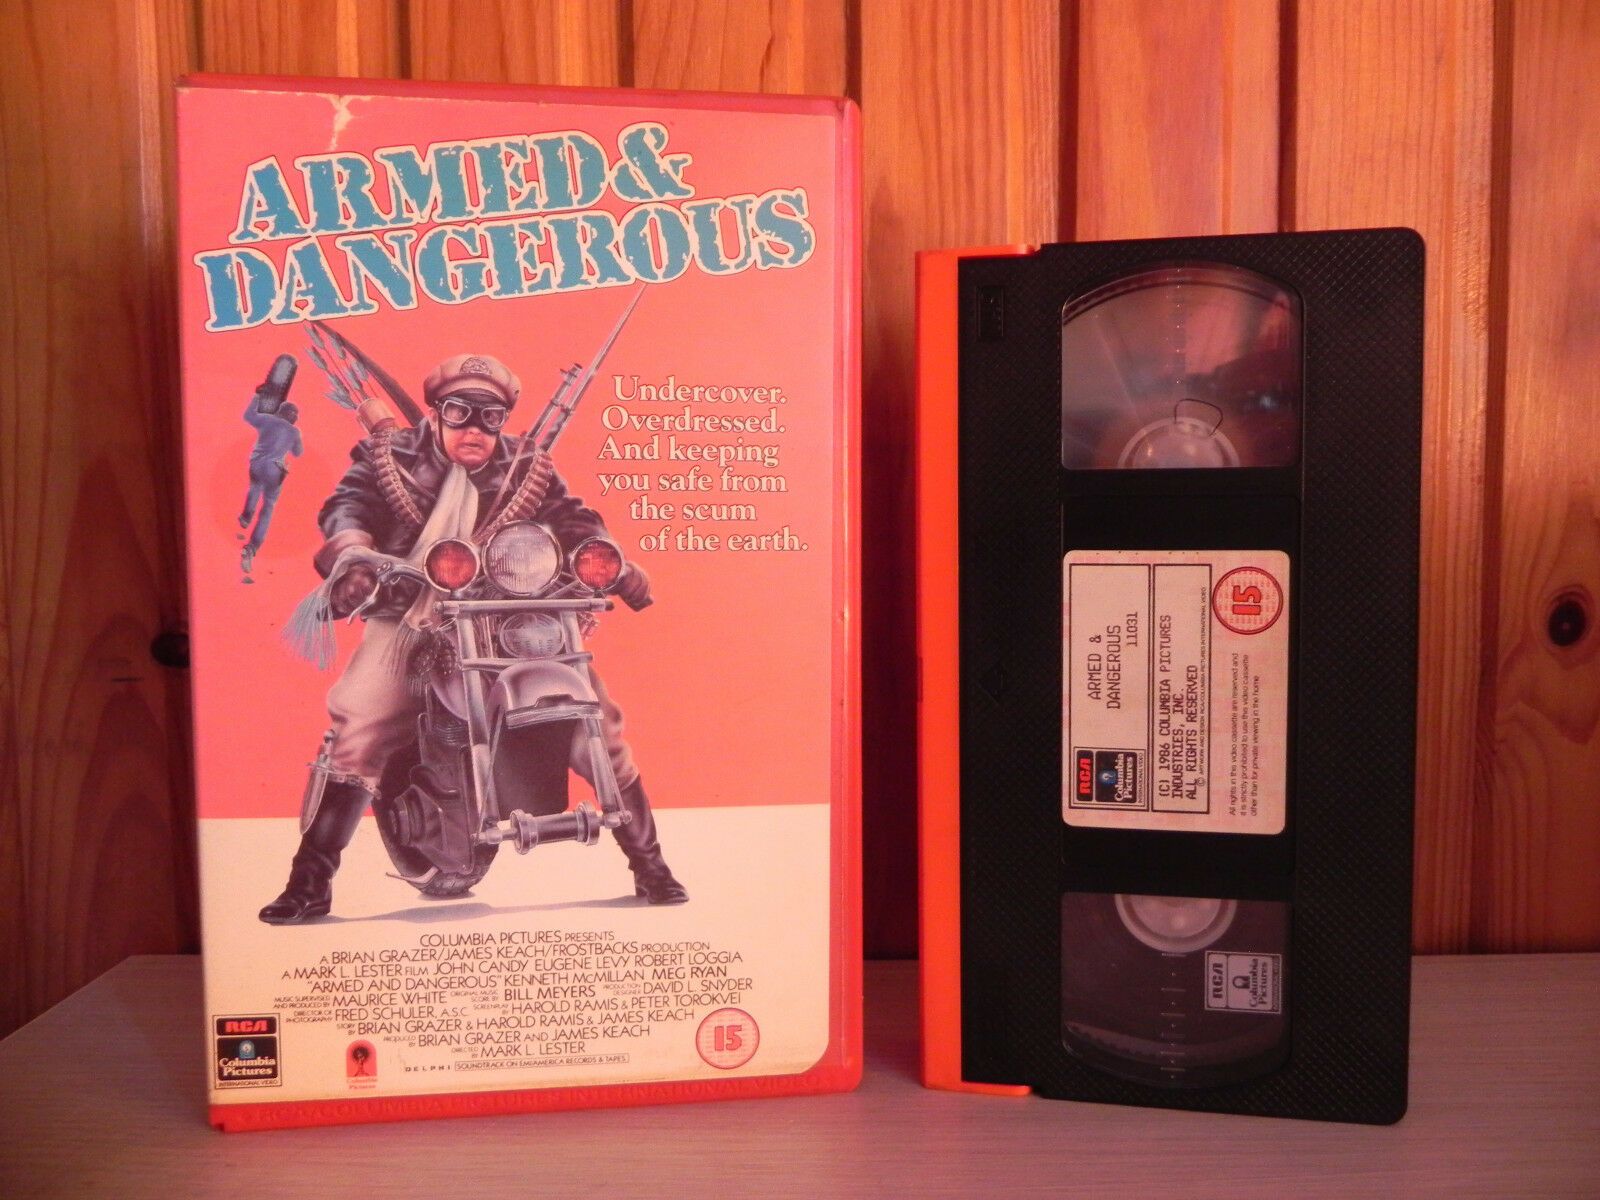 Armed And Dangerous - John Candy - Great Comedy - RCA Columbia - CVT 11031 - VHS-